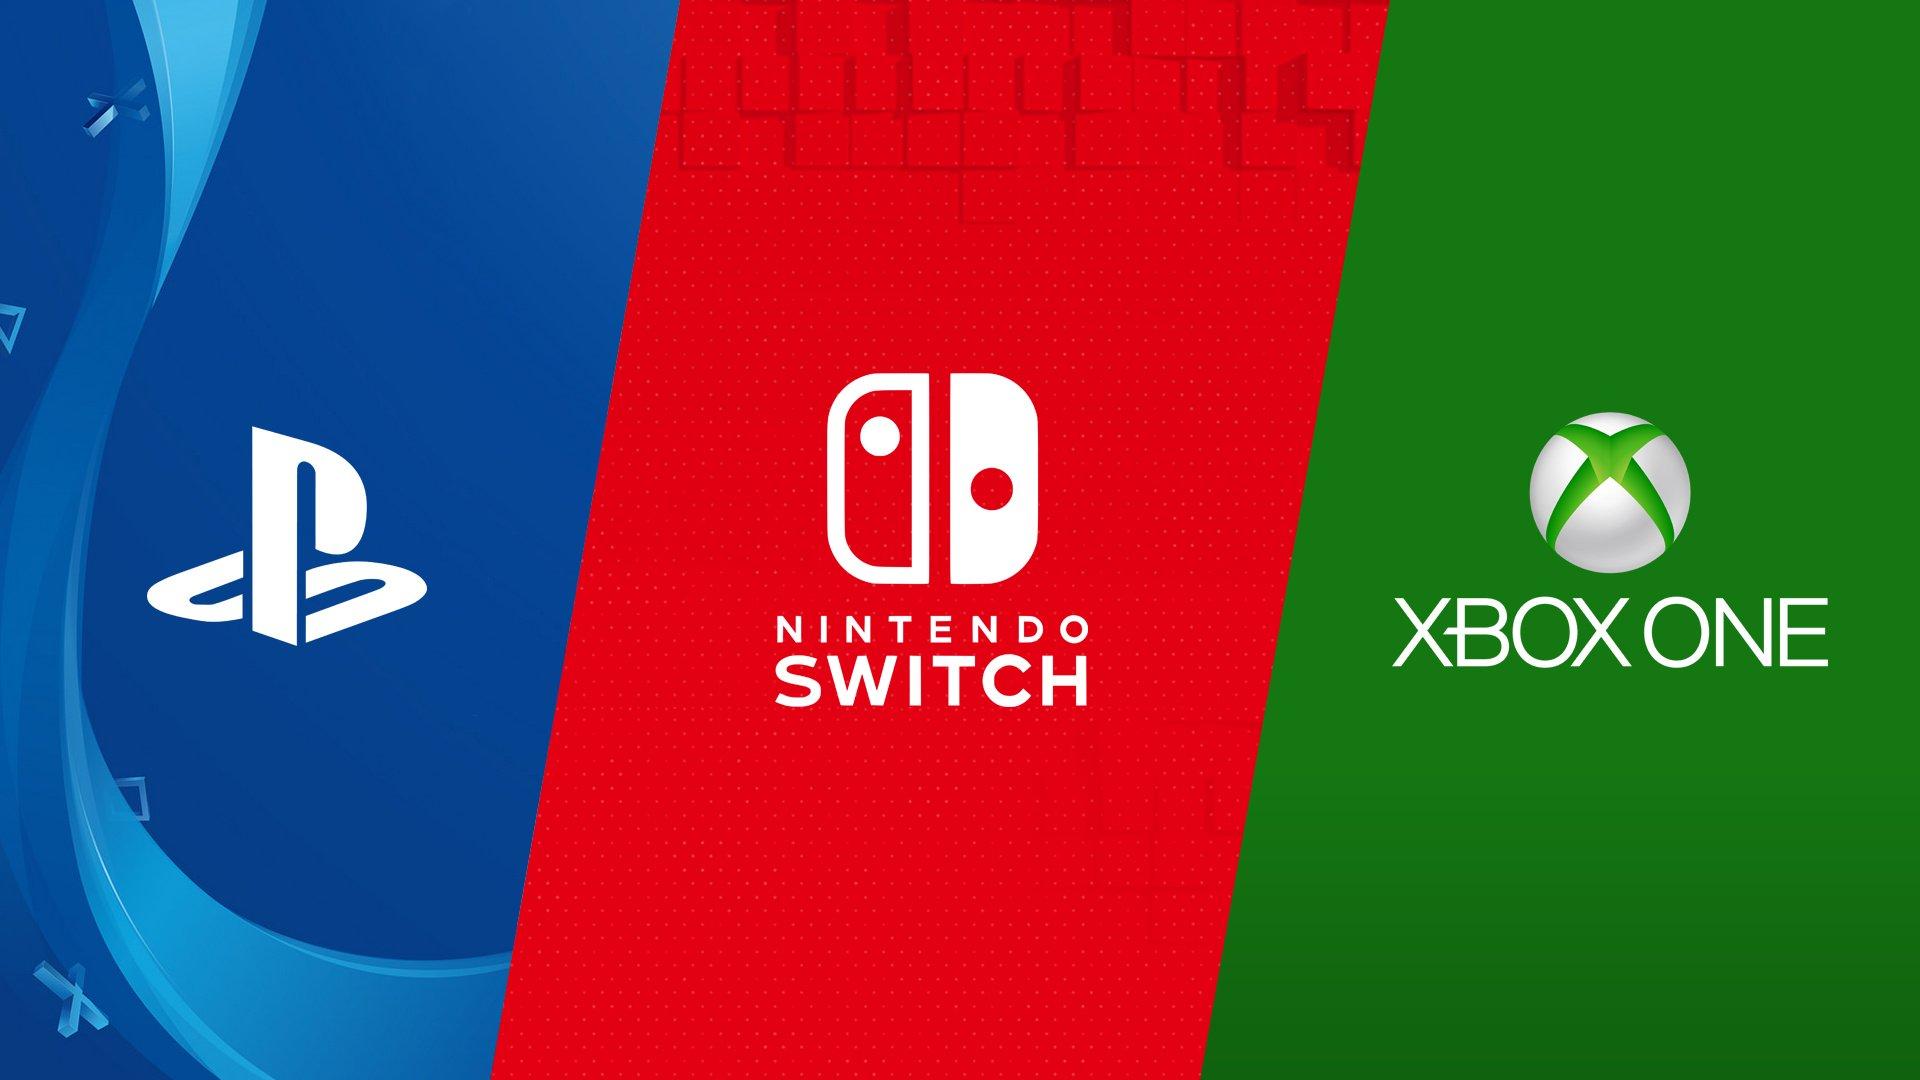 PS4 Finally Supports Full Cross Play With Switch And Other